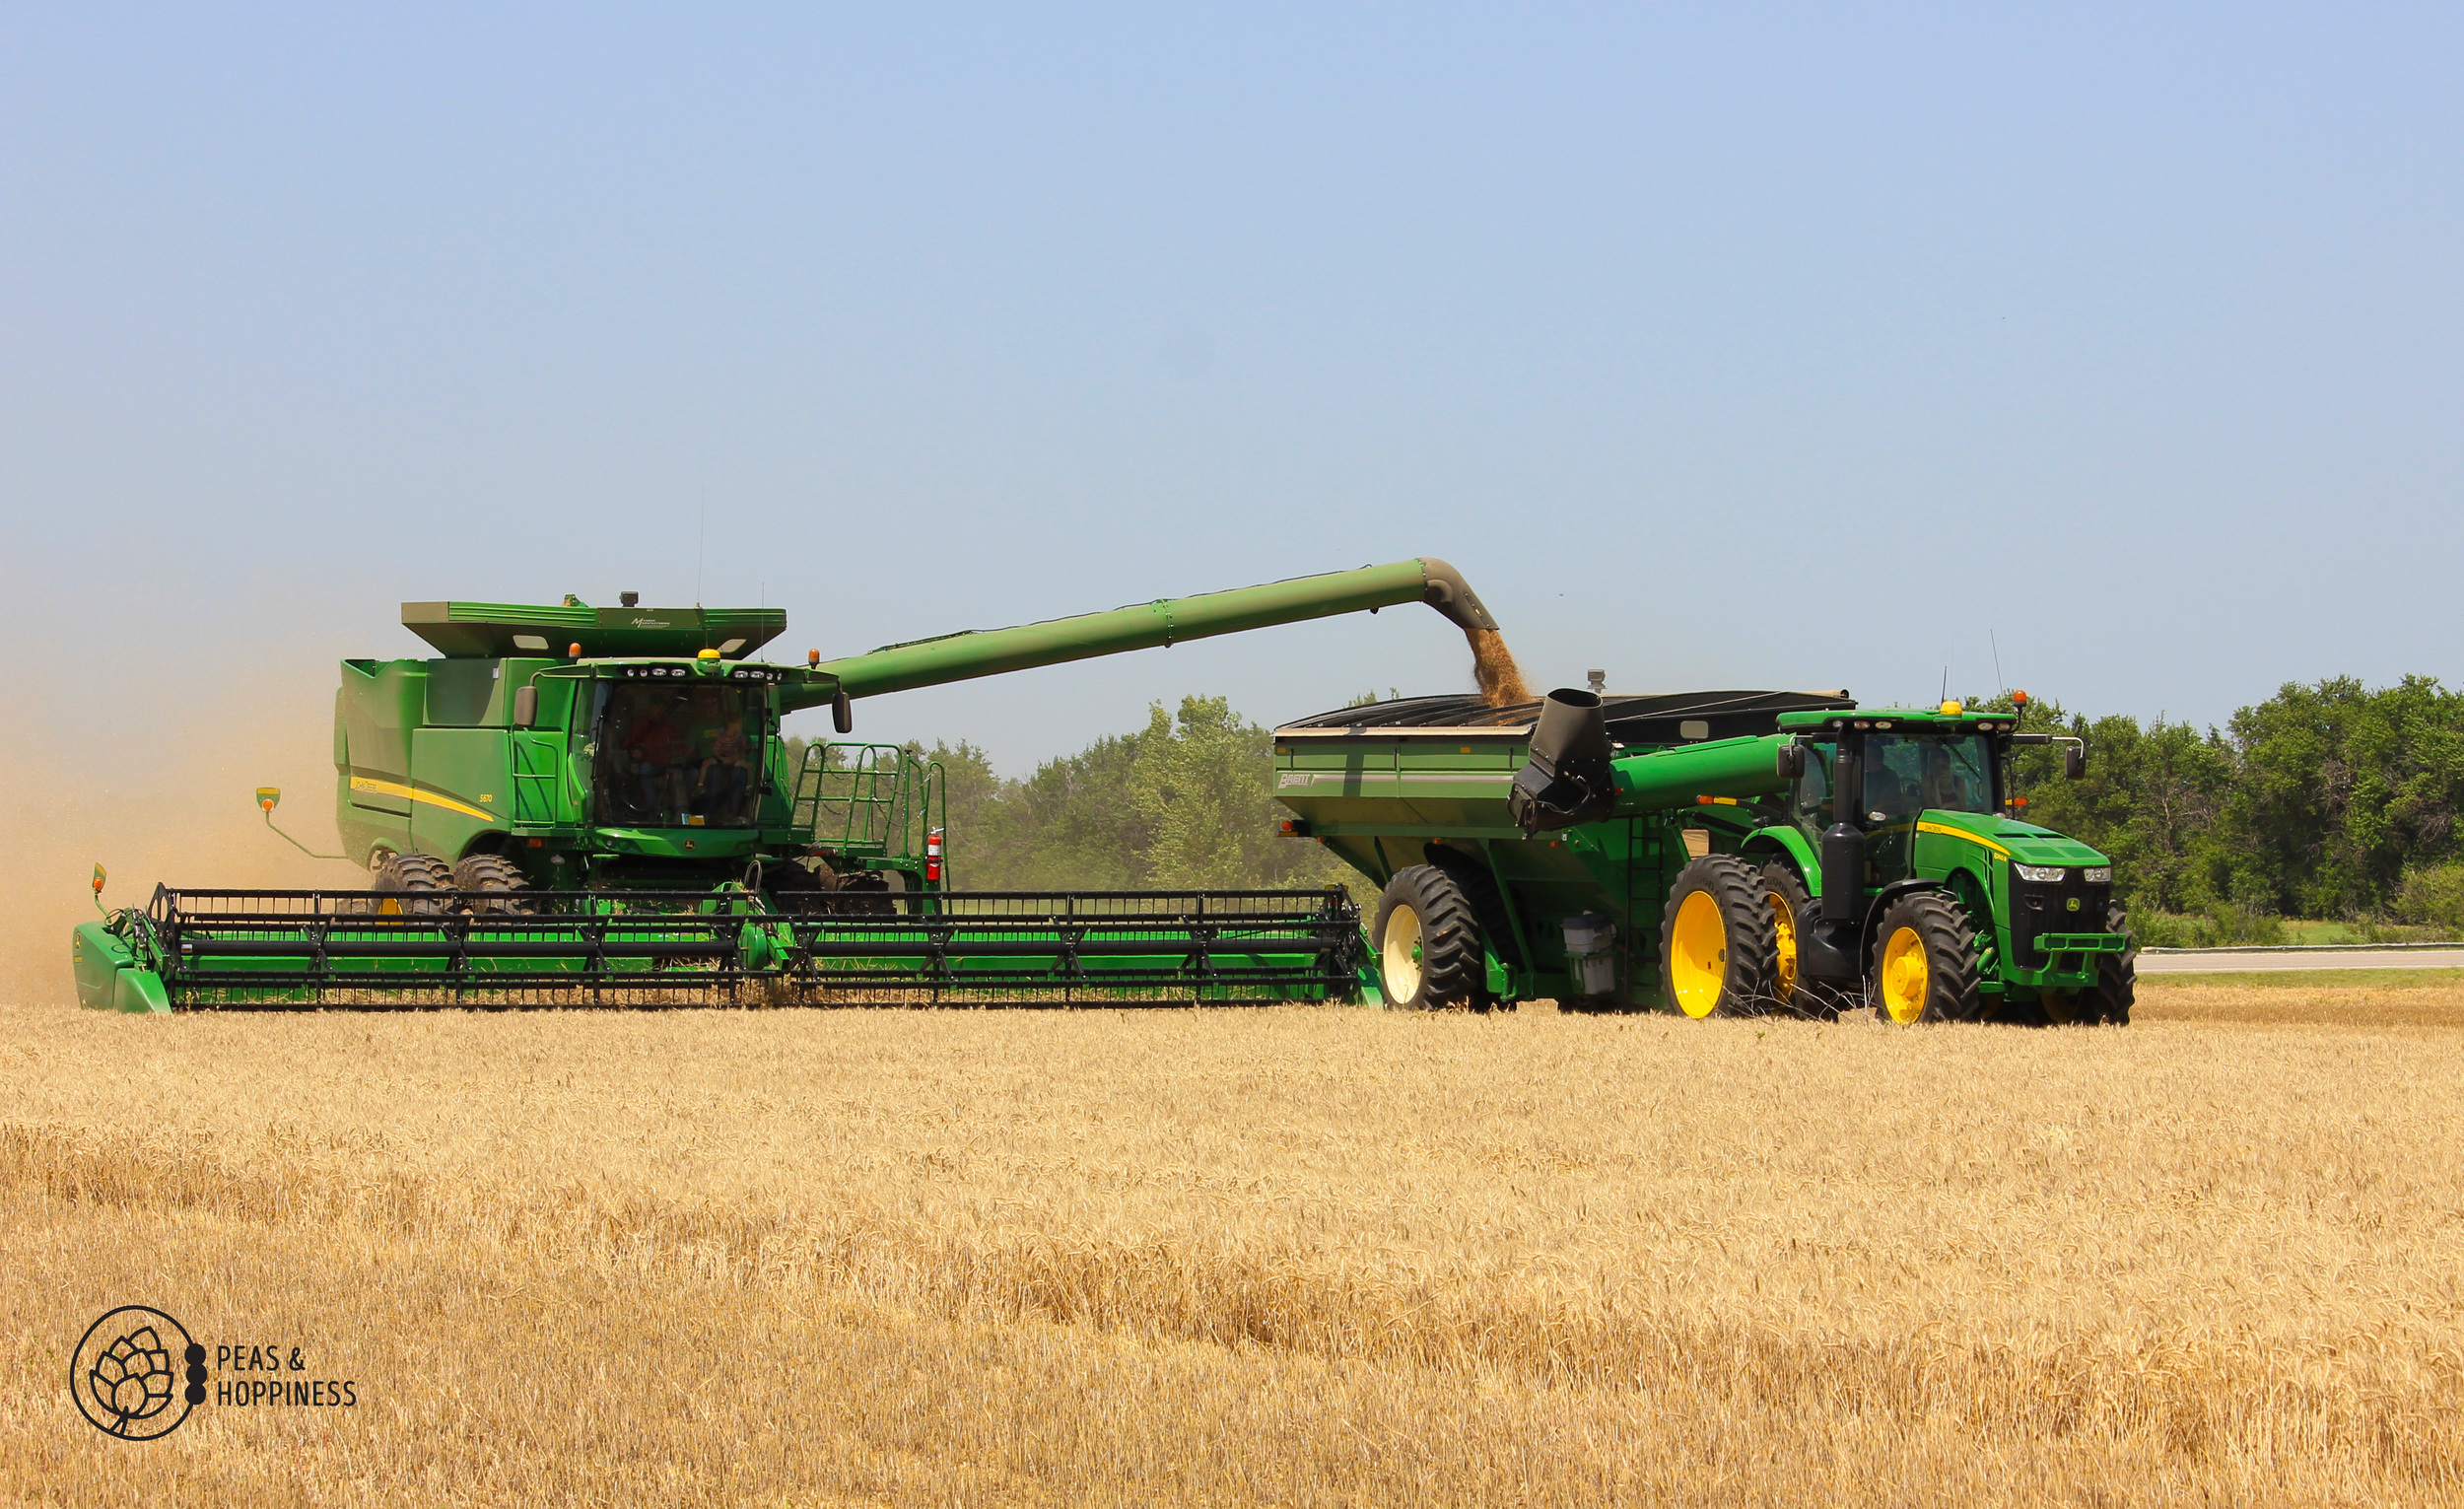 Combine unloading into the grain cart. Instead of stopping to take time to unload directly into the semi, unloading into a grain cart which then takes the grain to the semi allows Dad to continuously cut wheat without missing a beat.